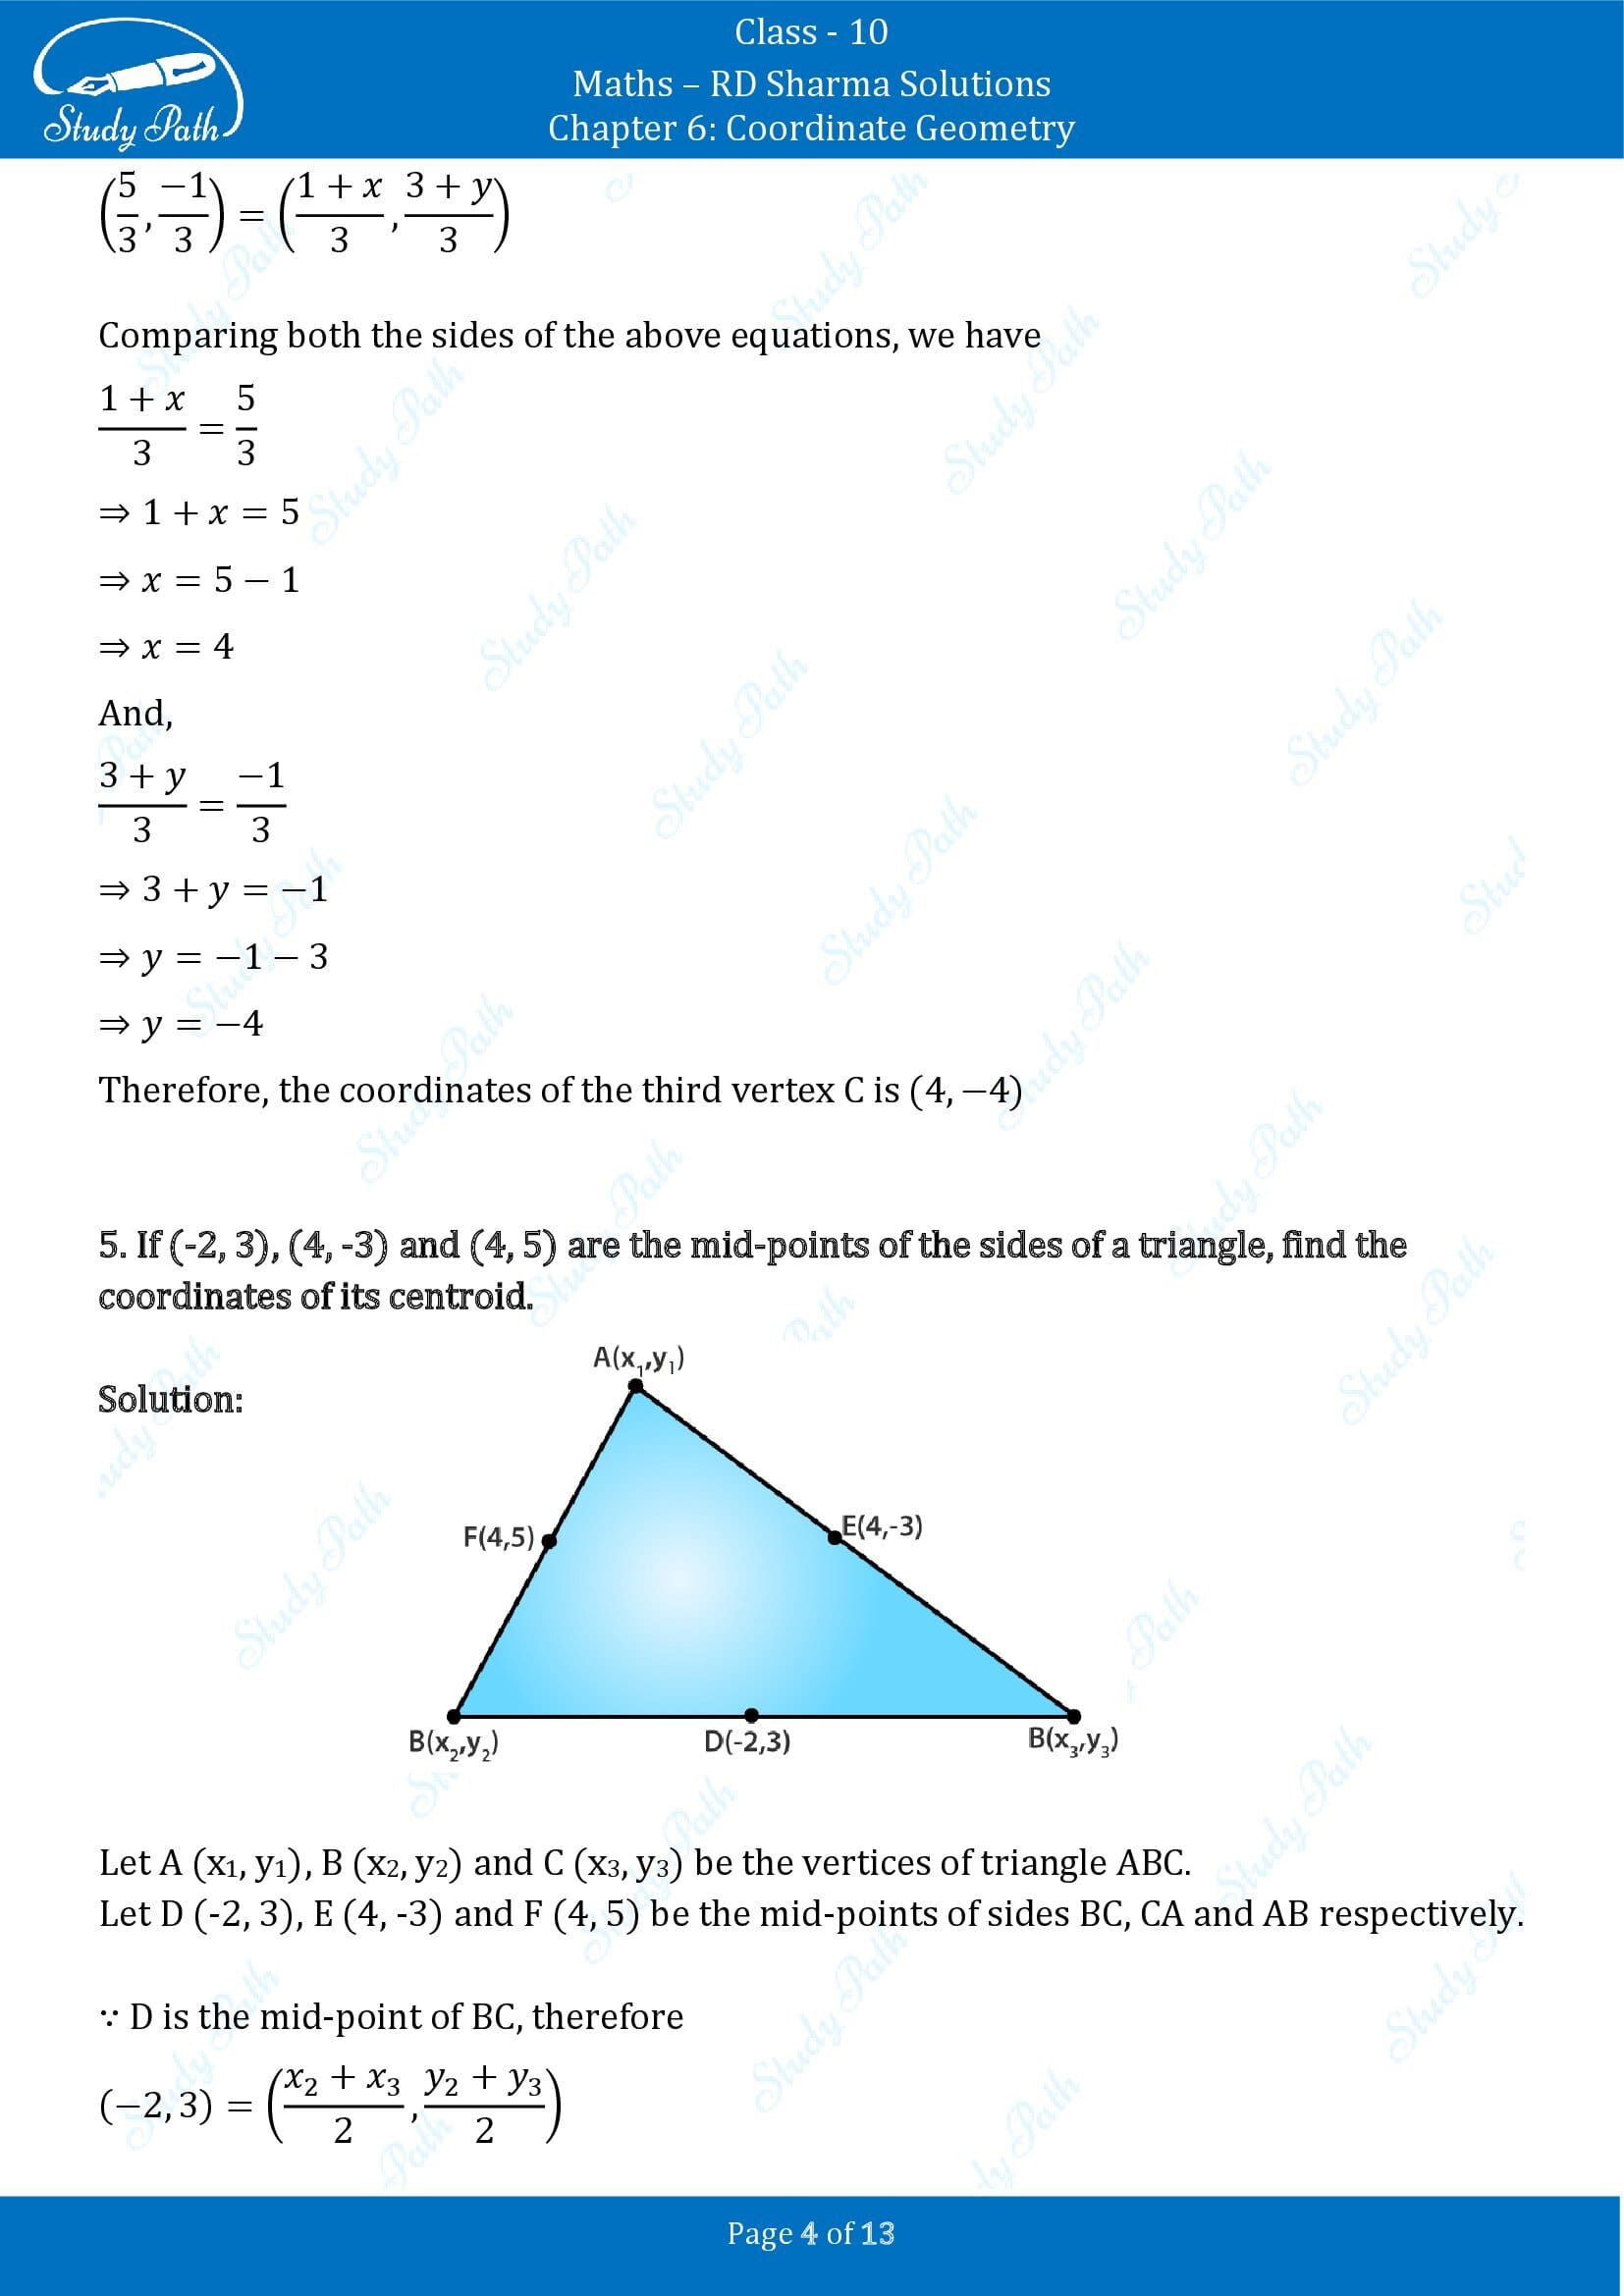 RD Sharma Solutions Class 10 Chapter 6 Coordinate Geometry Exercise 6.4 00004